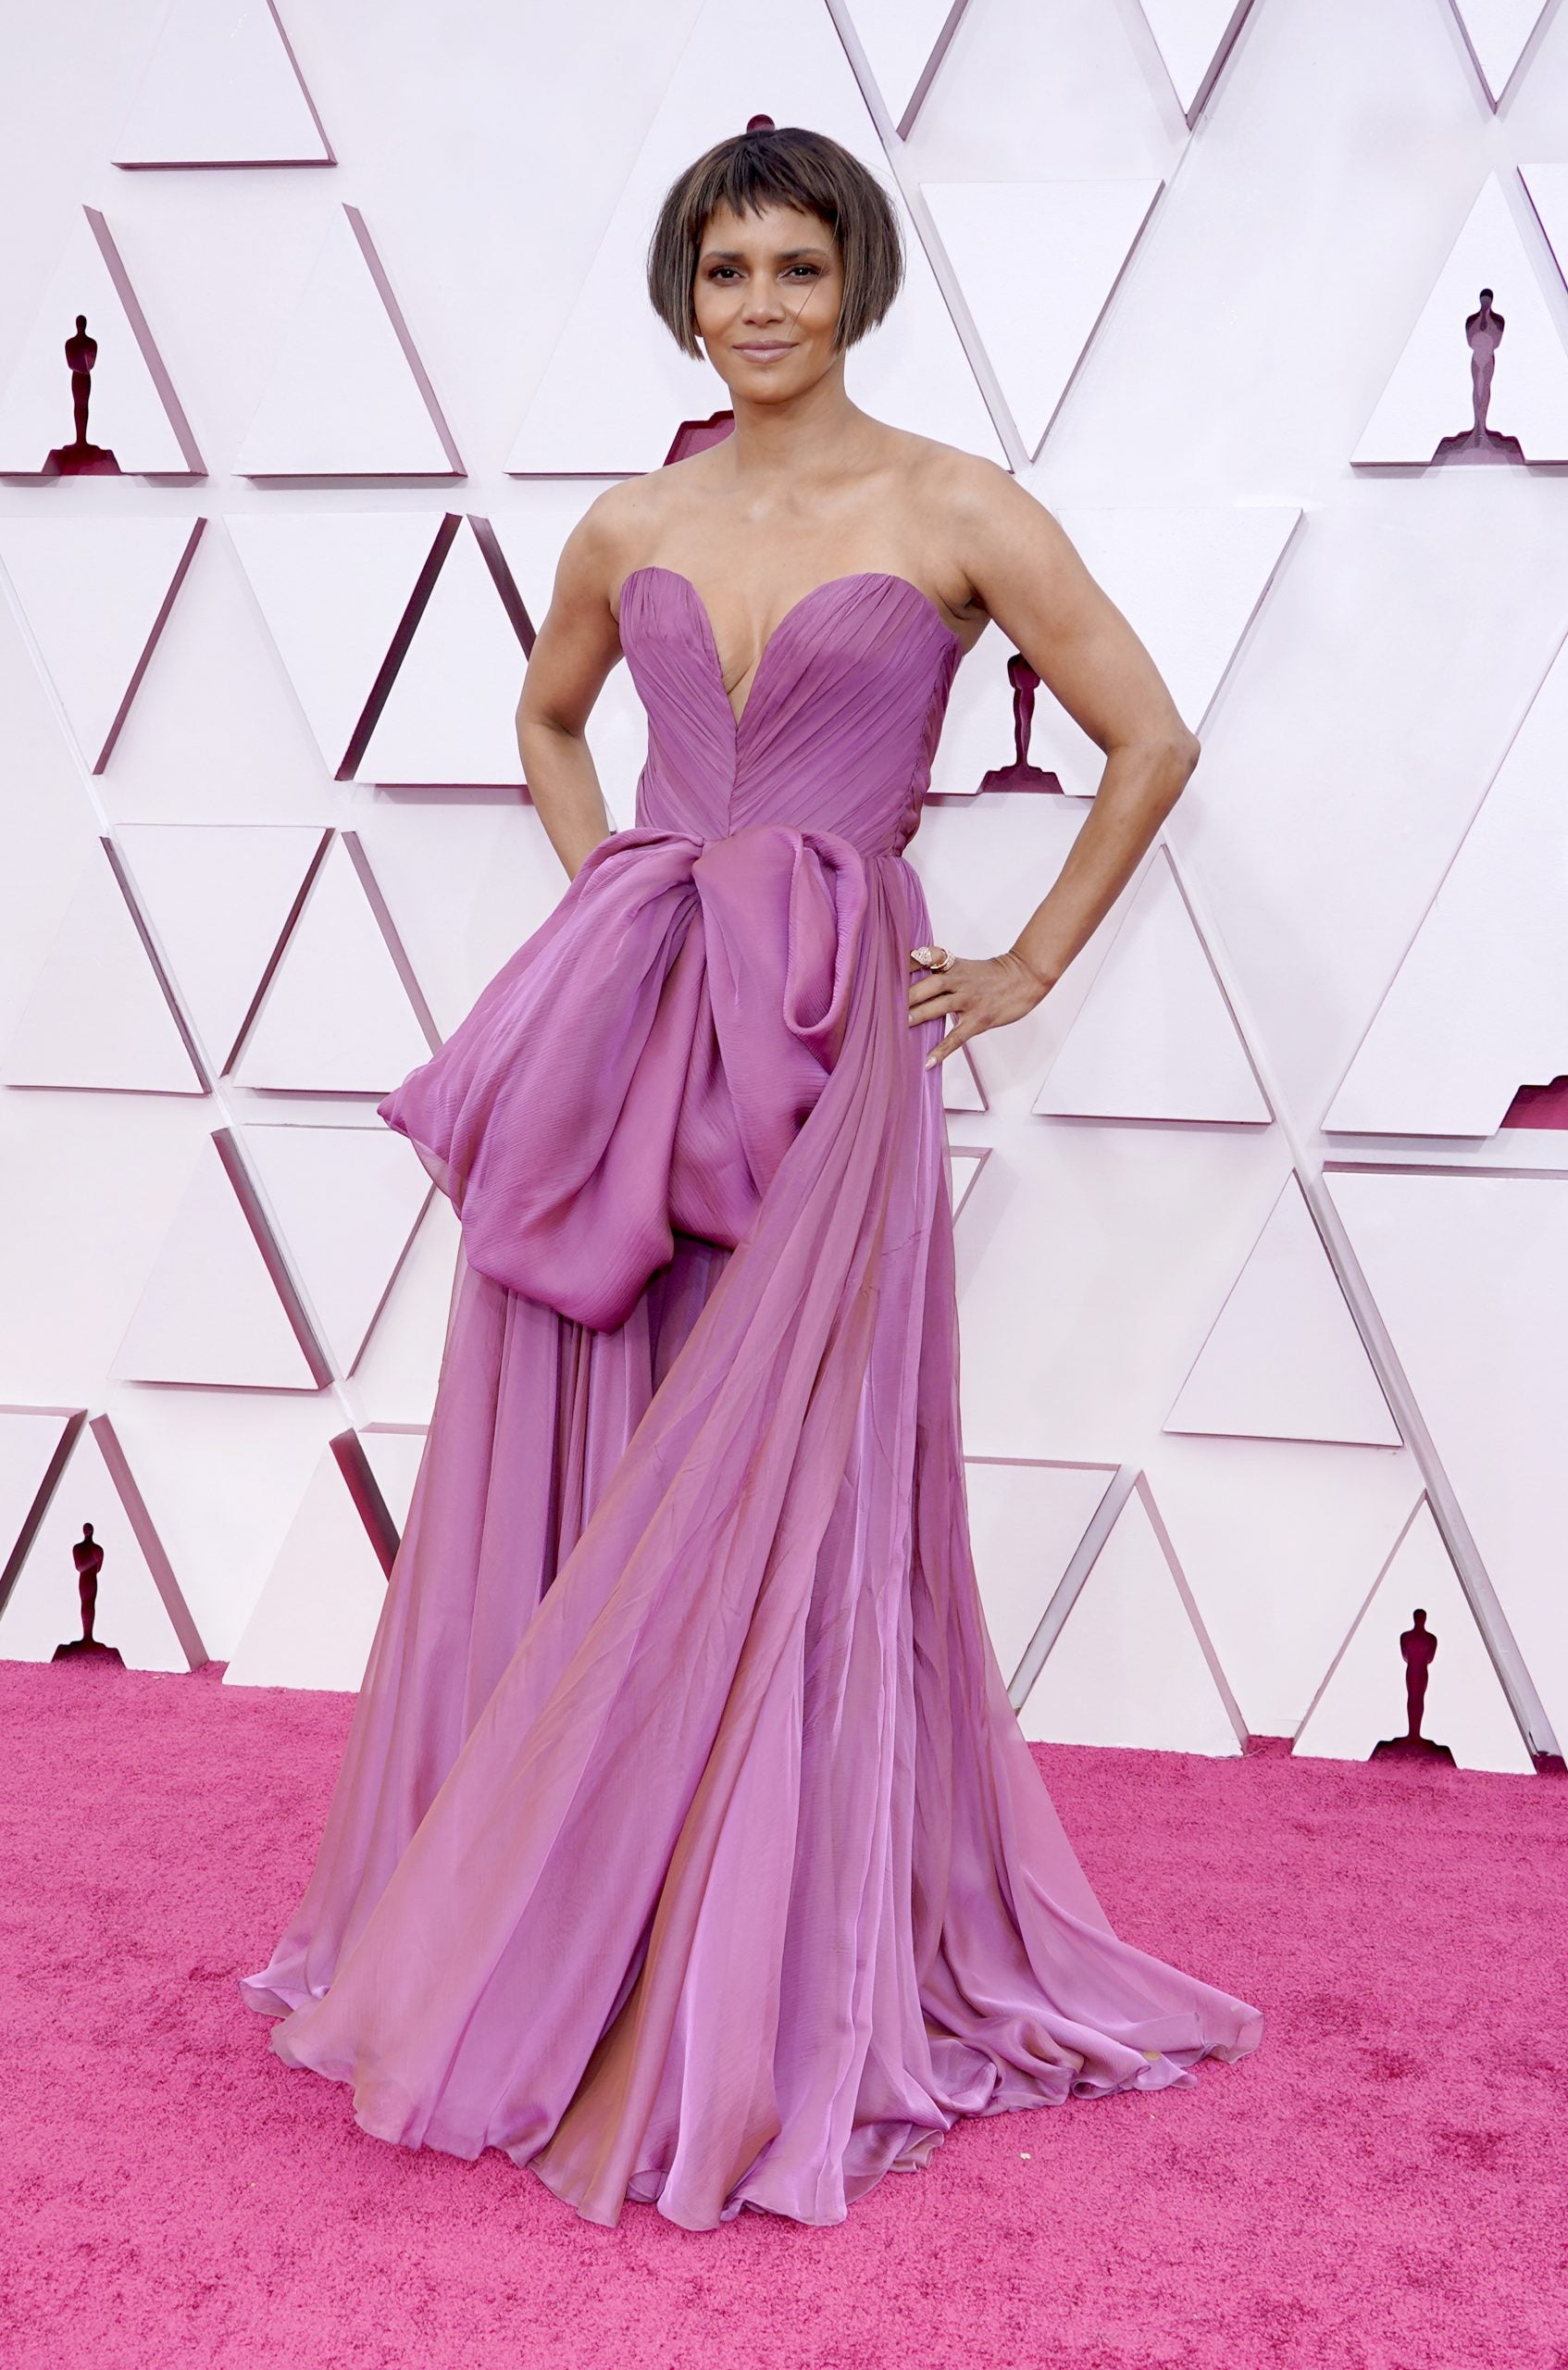 Halle Berry Twirls On The 2021 Oscars Red Carpet In Dolce & Gabbana